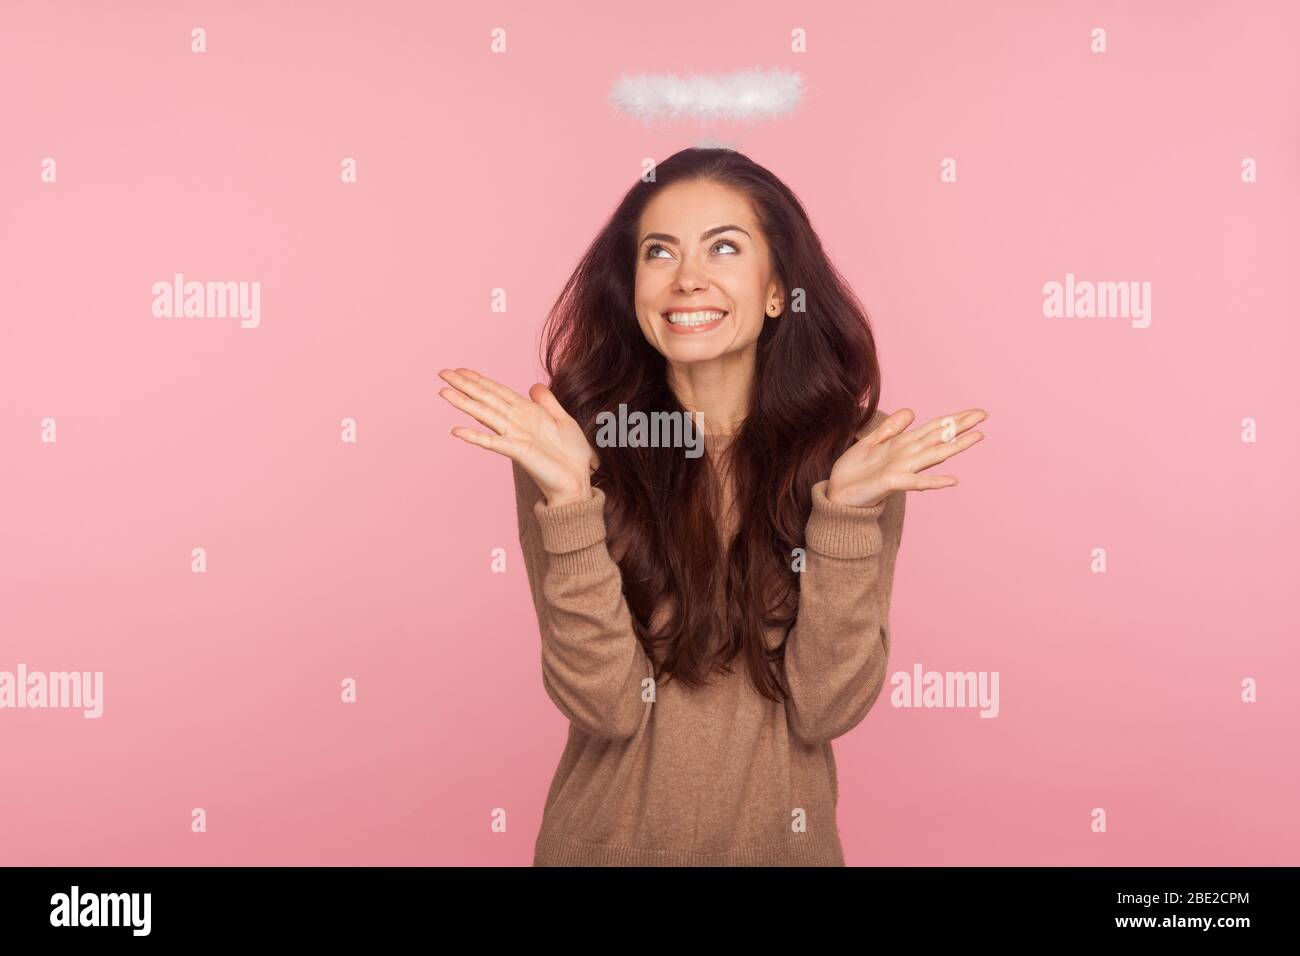 Portrait of lovely playful young woman with halo above head raising hands in bewilderment, gesturing I don't know, looking up and smiling confused. in Stock Photo